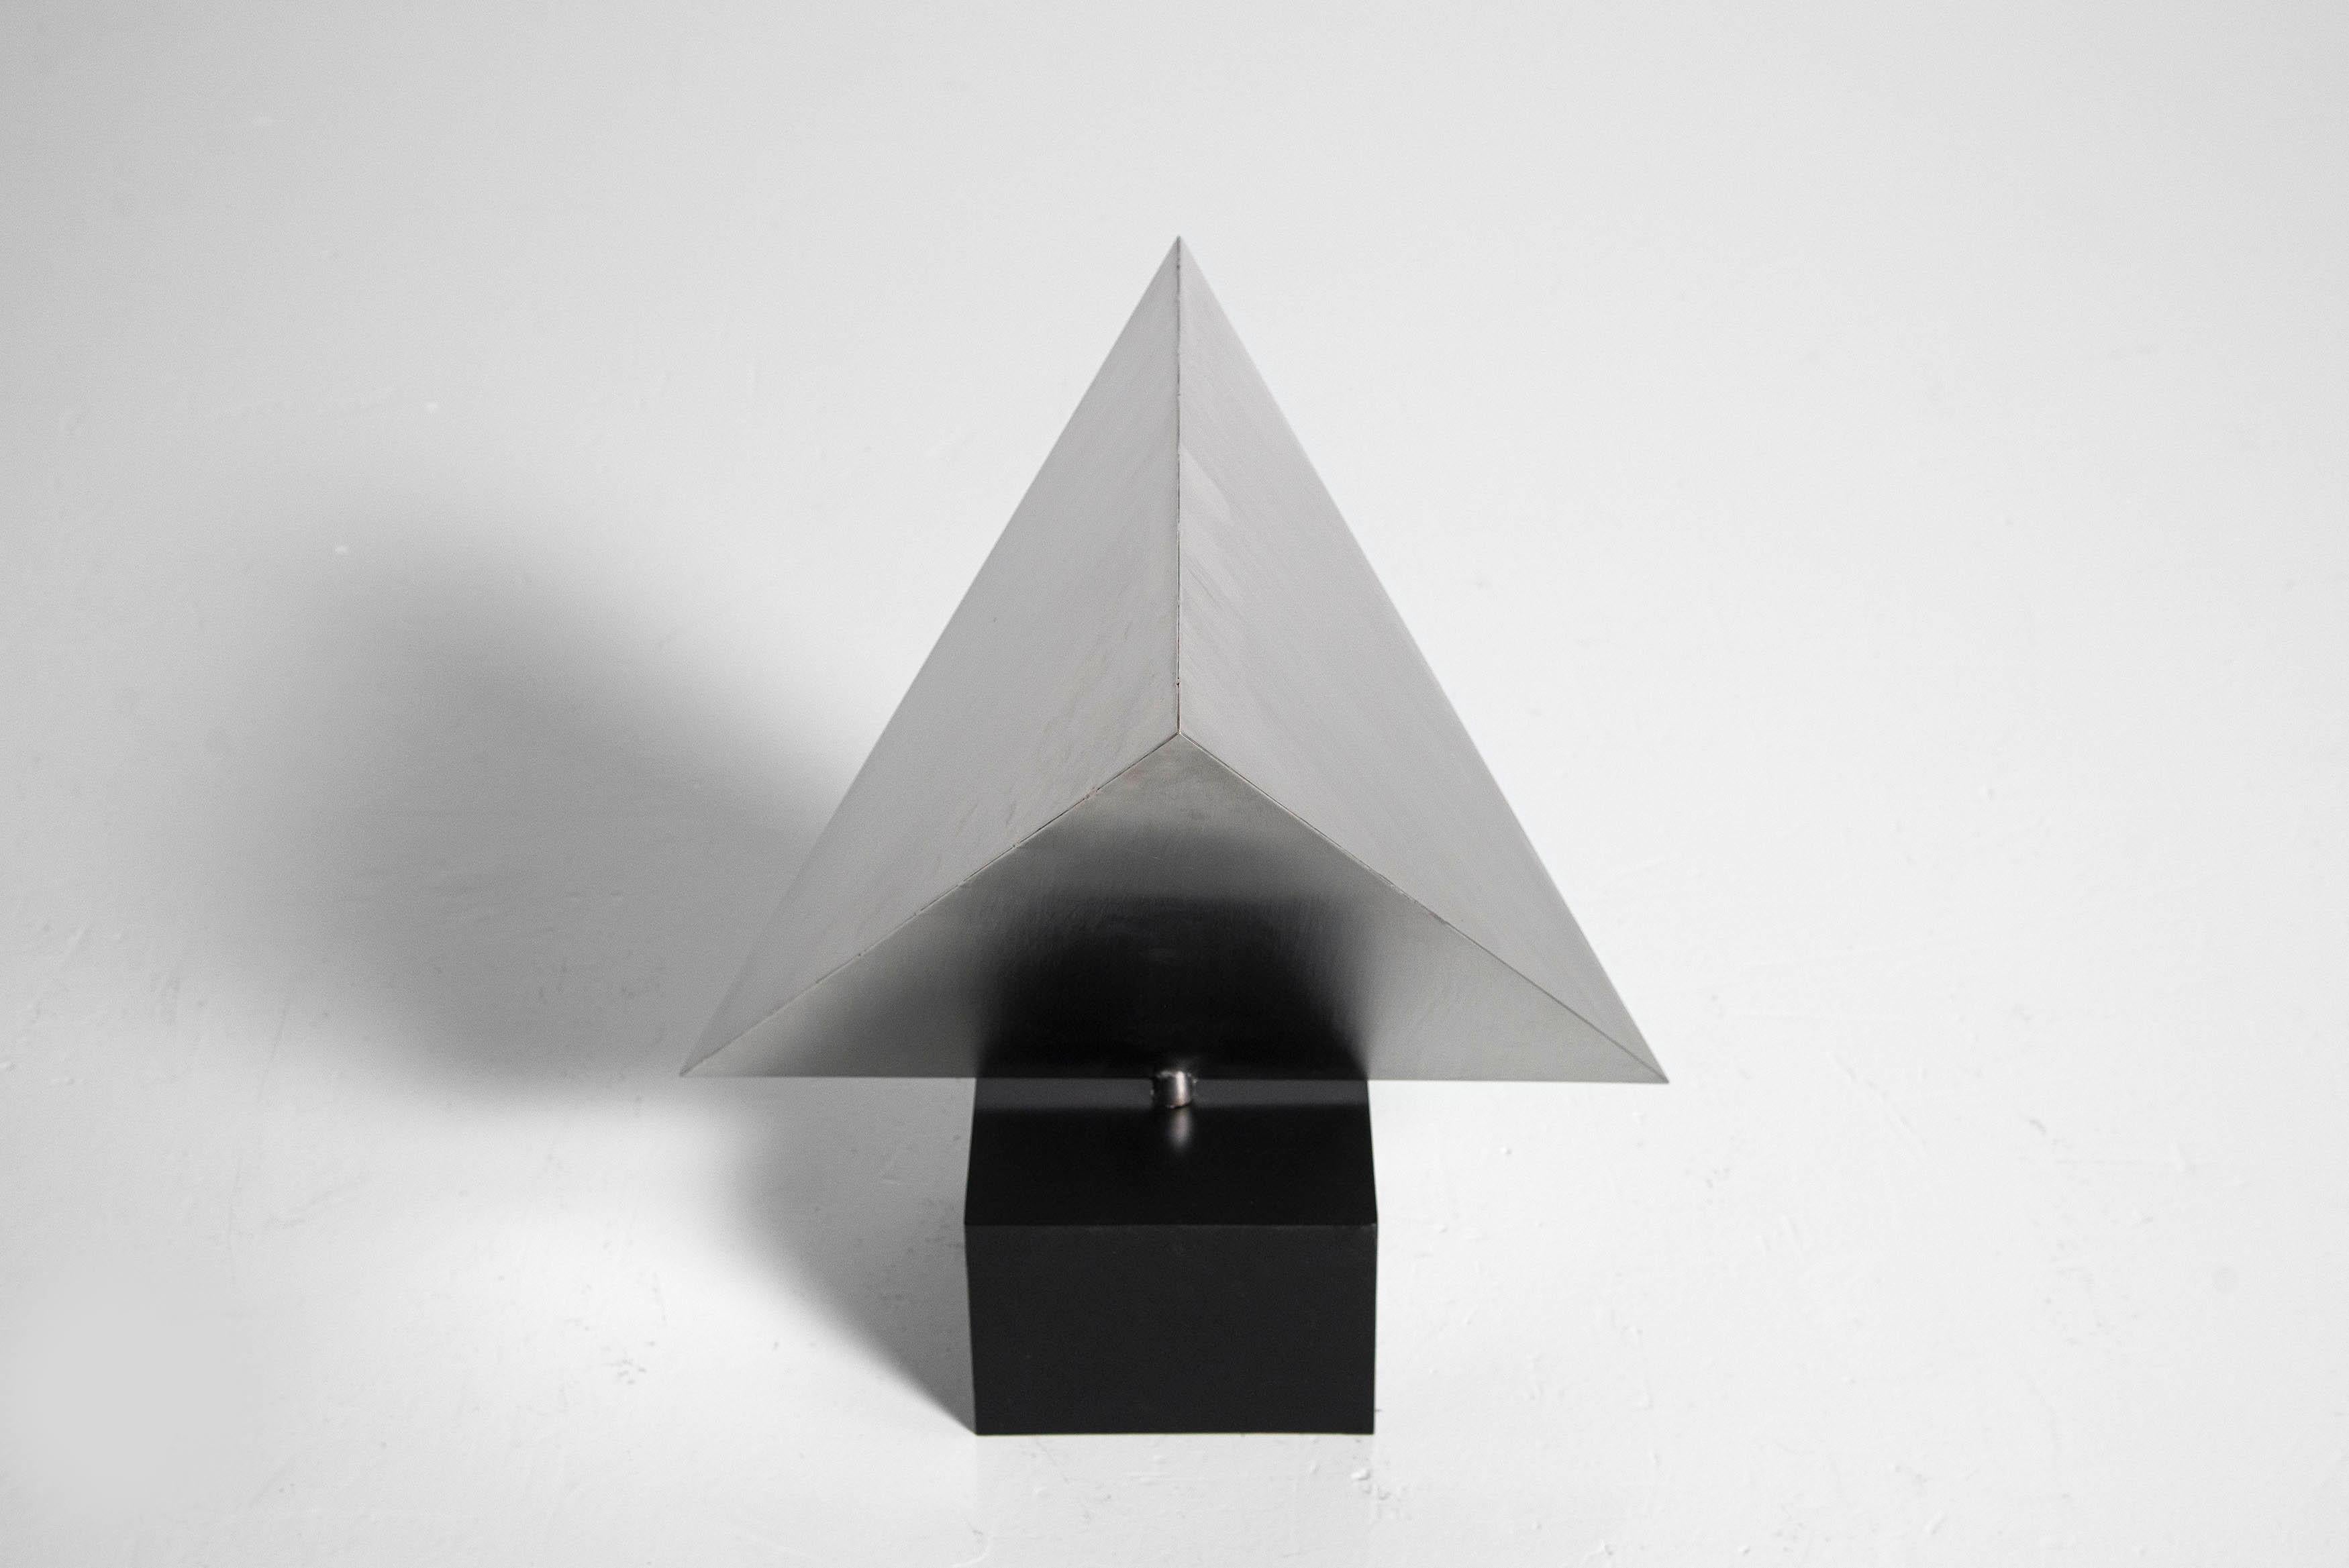 Stainless Steel Rudolf Wolf Pyramid Sculpture Holland 1975 For Sale